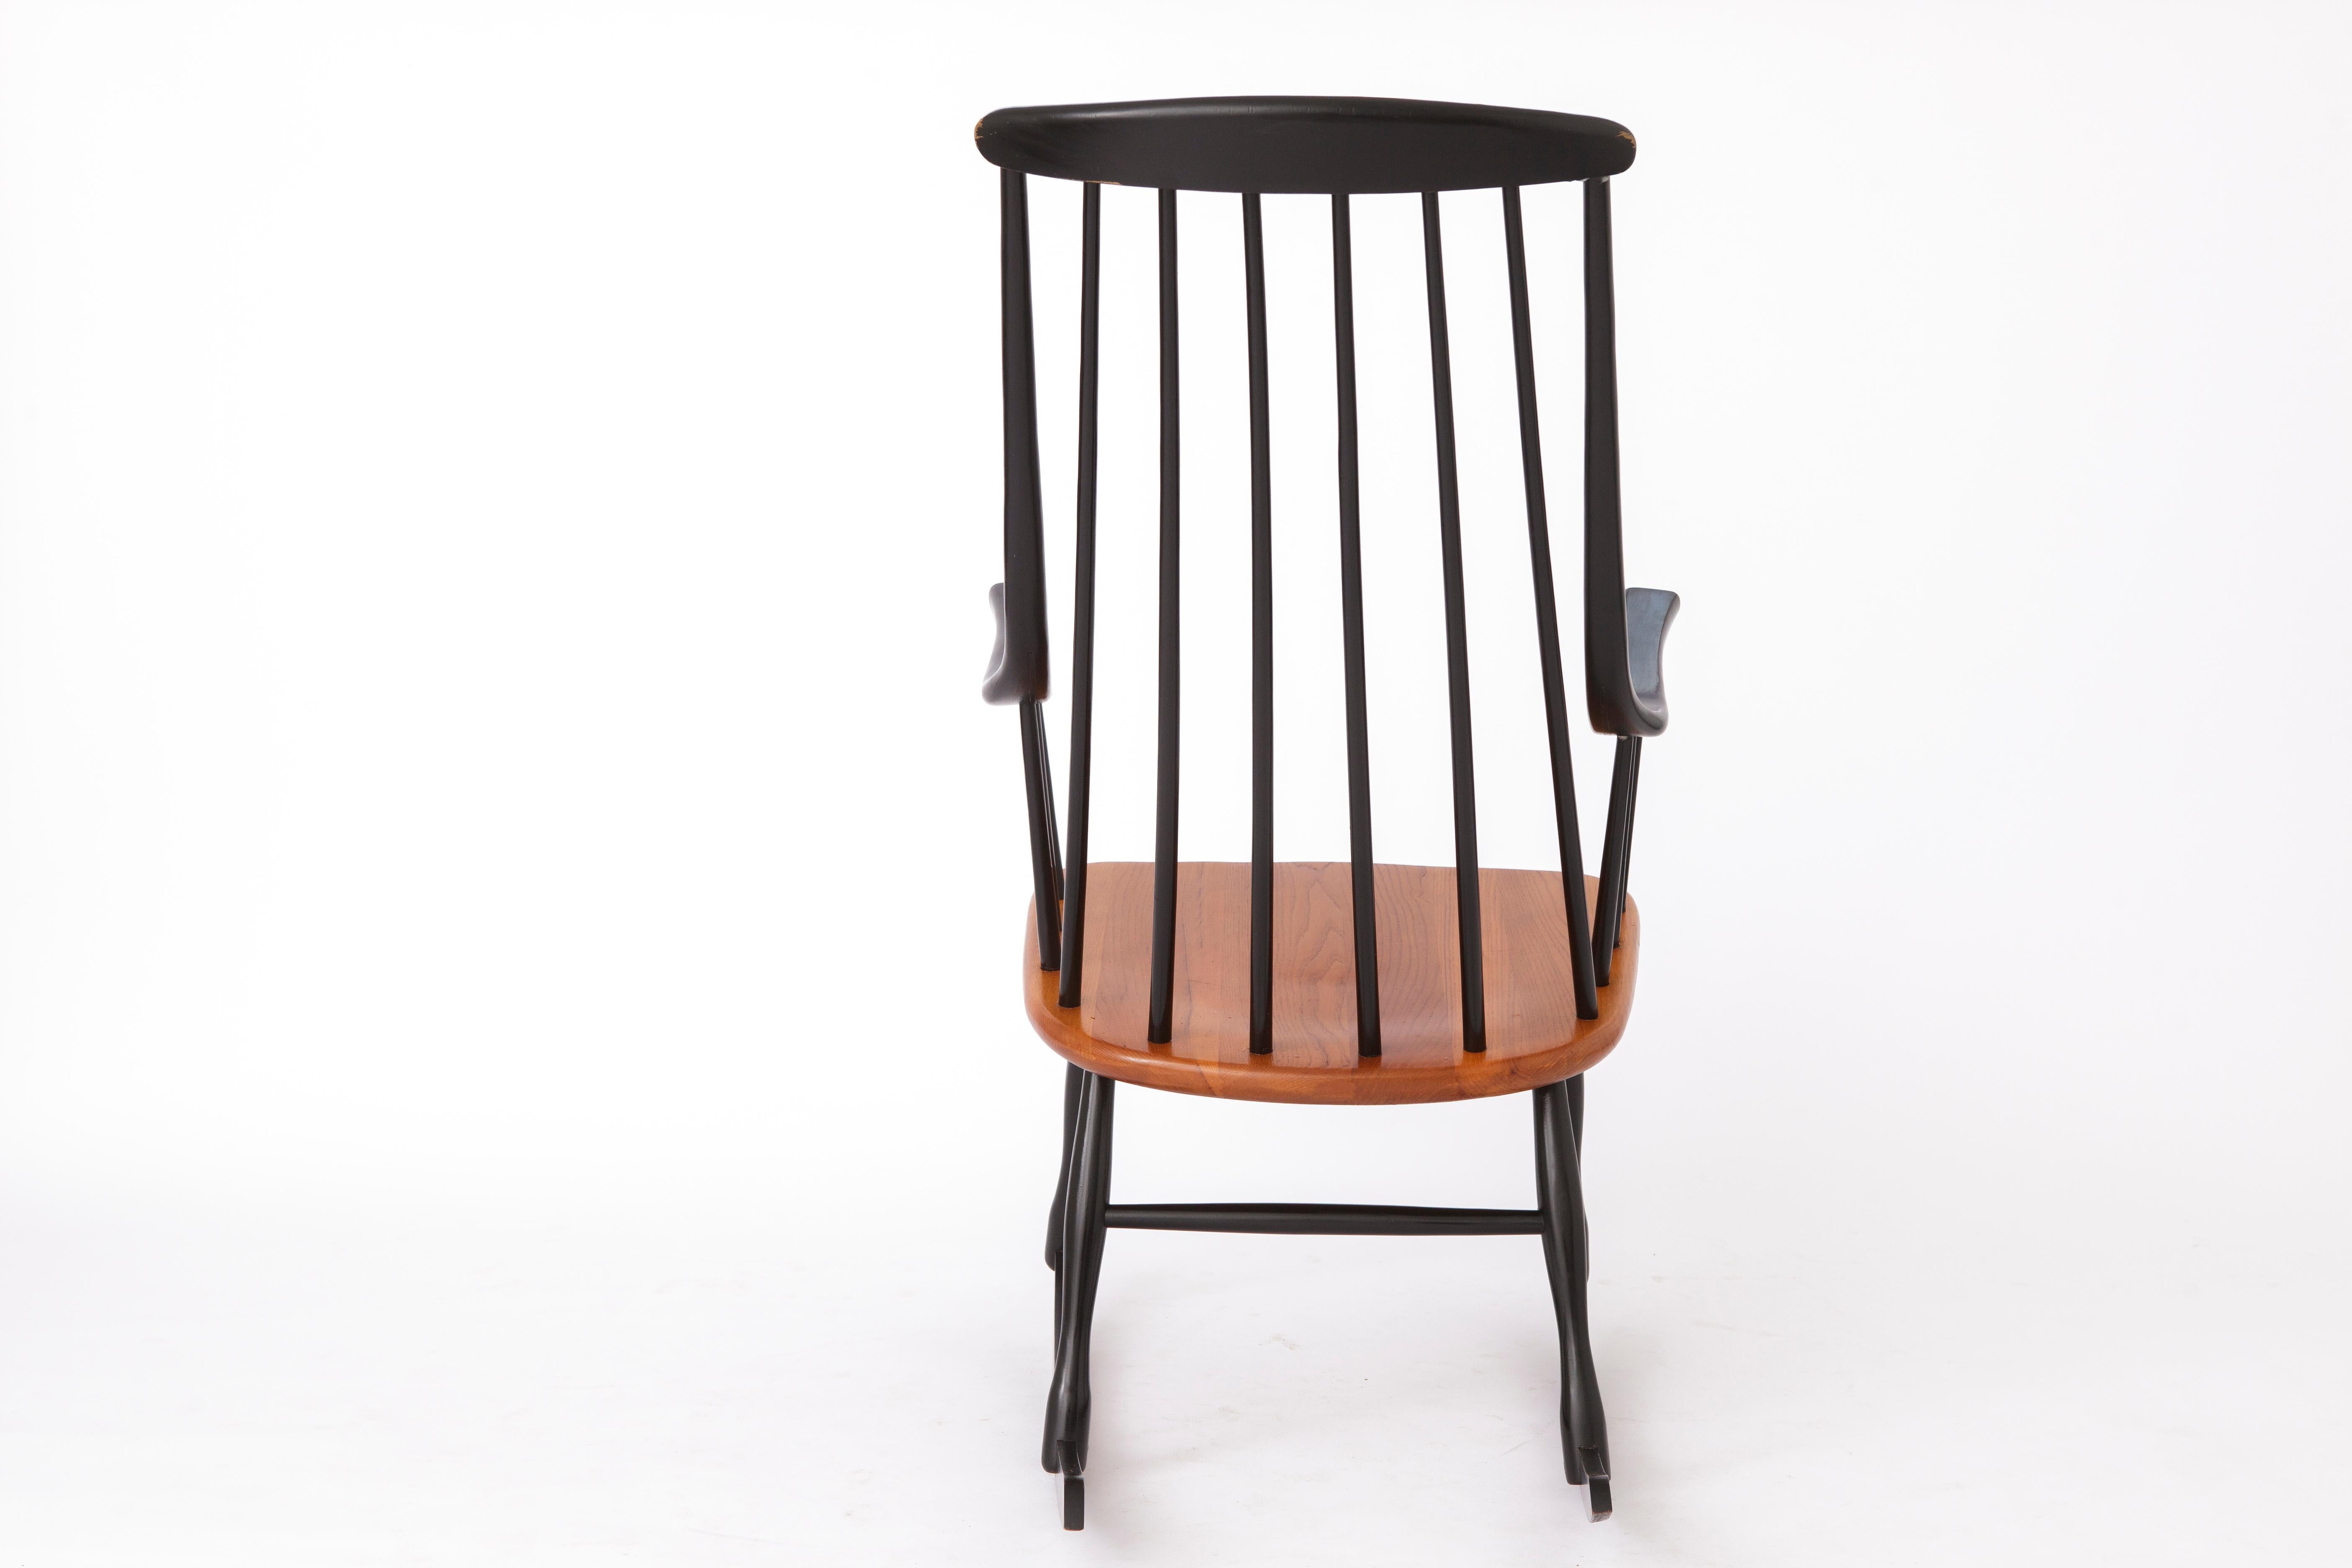 Teak Rocking Chair 1960s by Lena Larsson for Nesto, Sweden For Sale